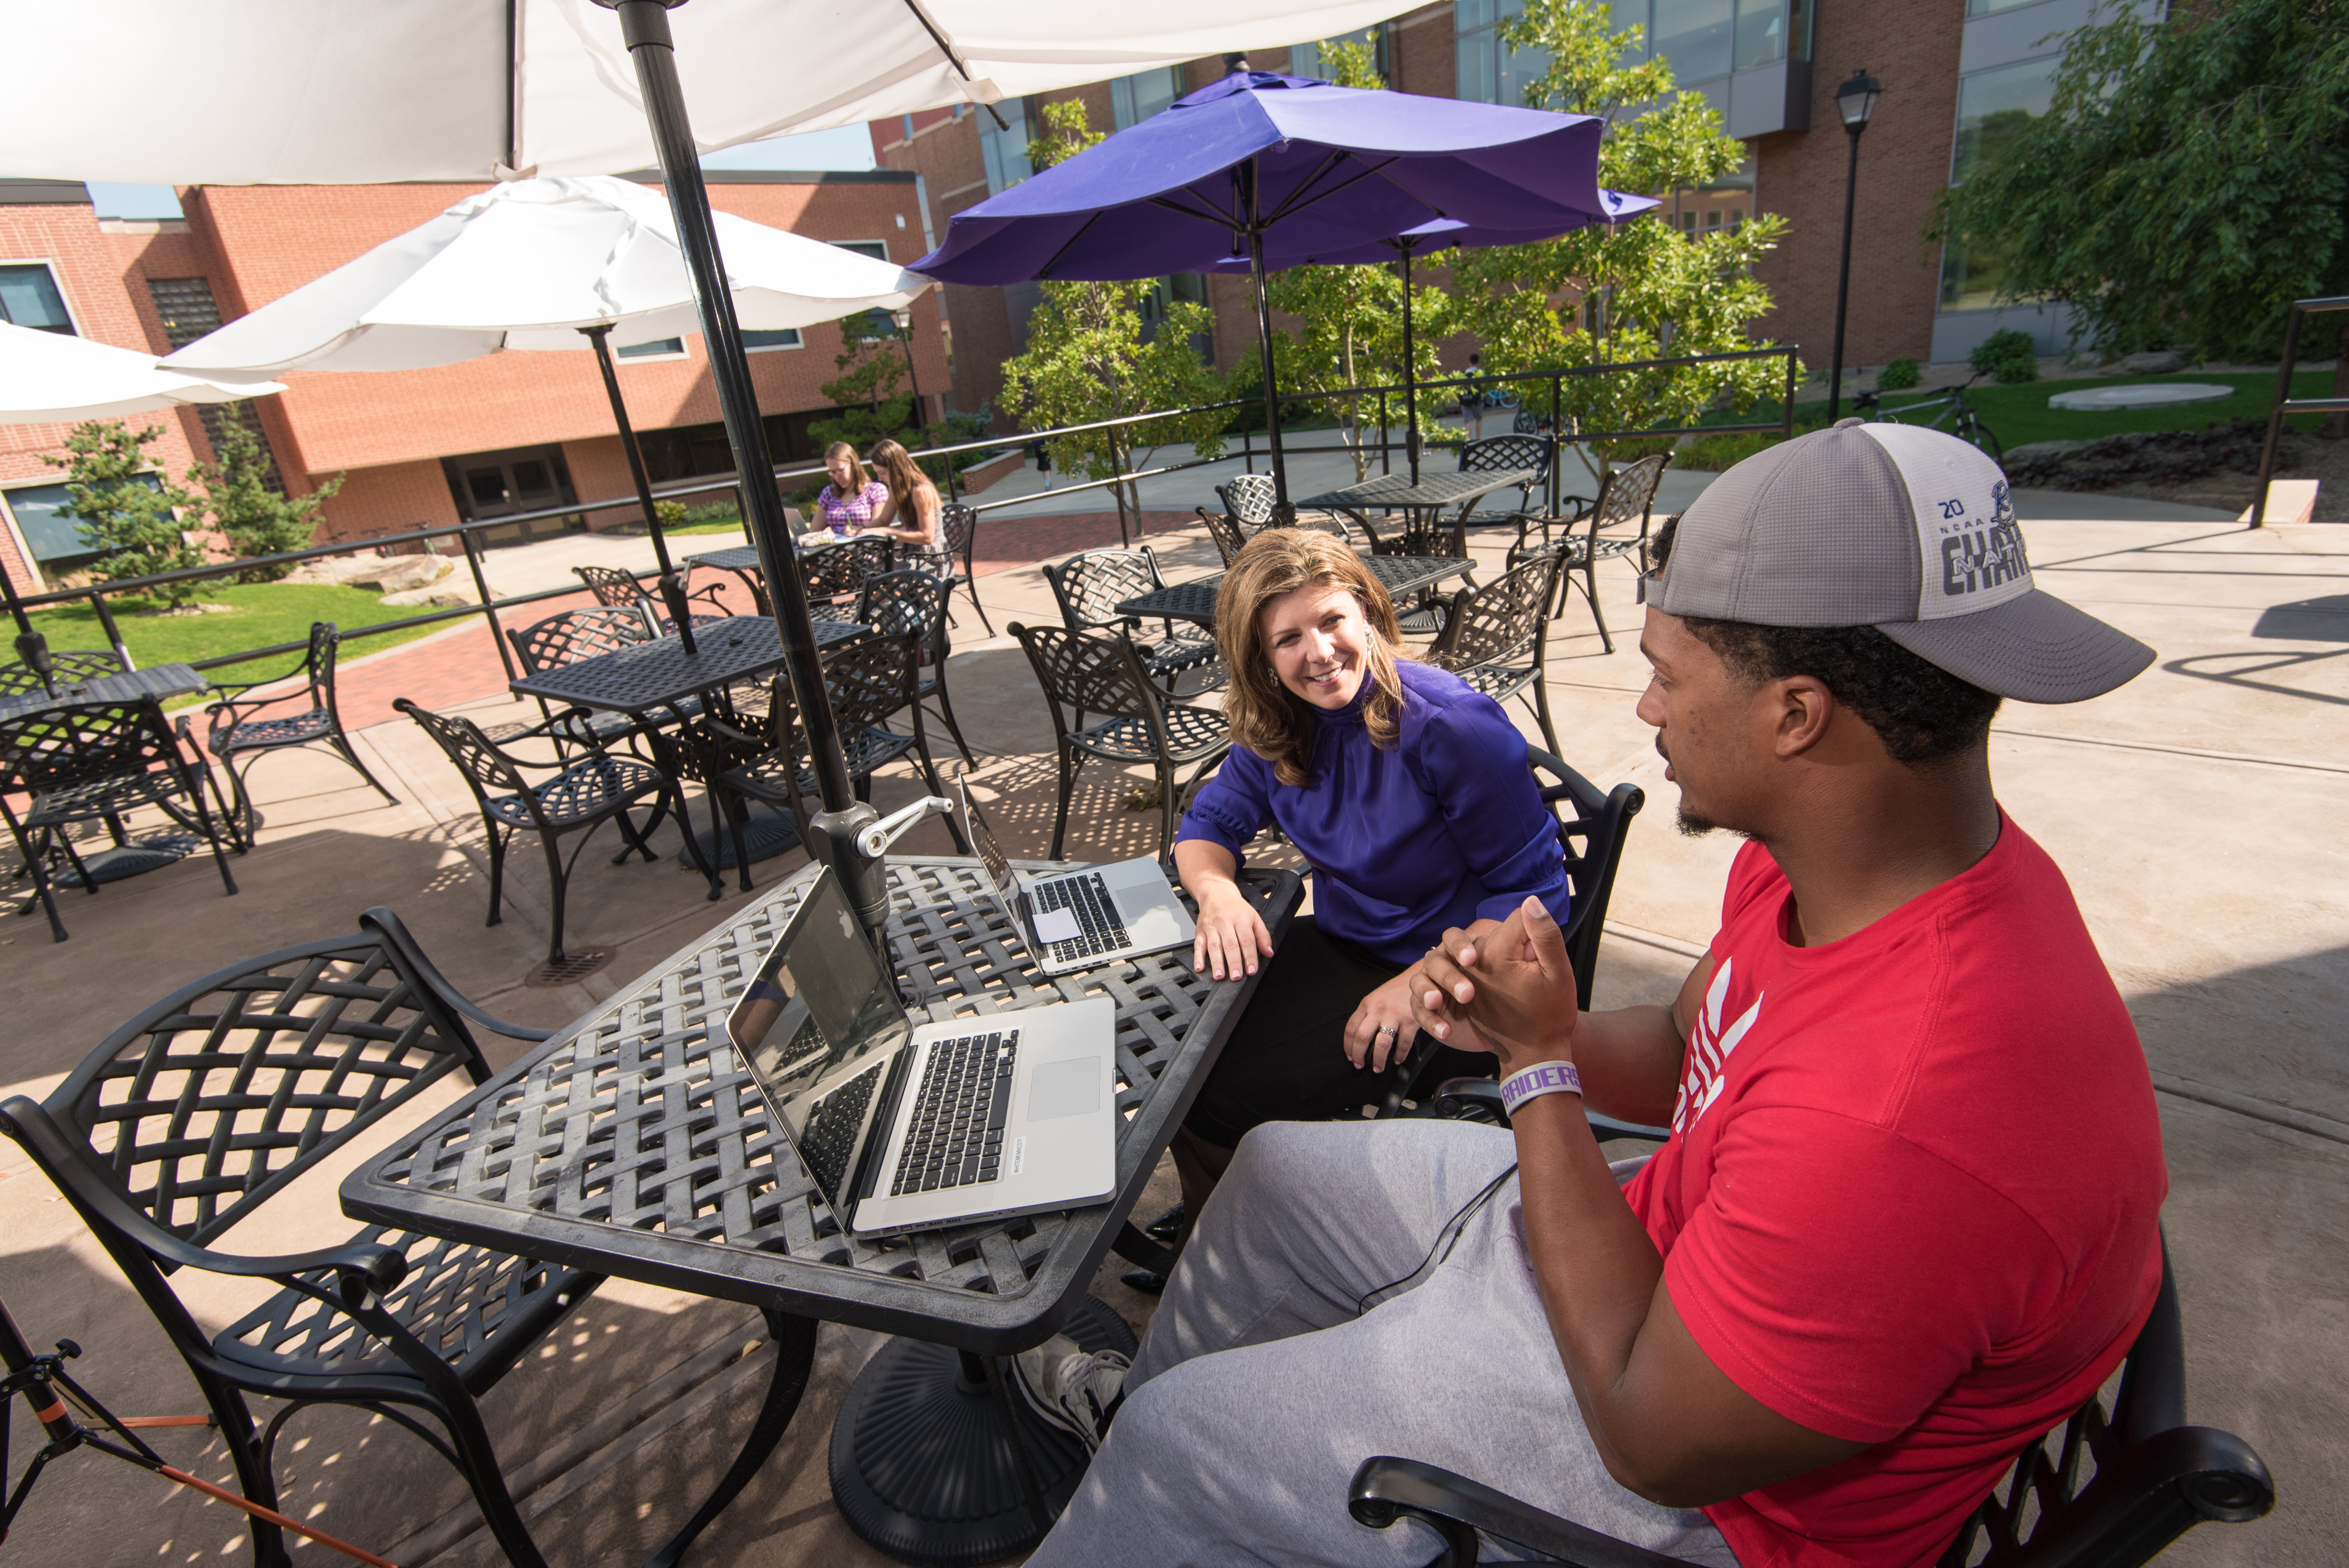 Student and professor using laptop on patio of library